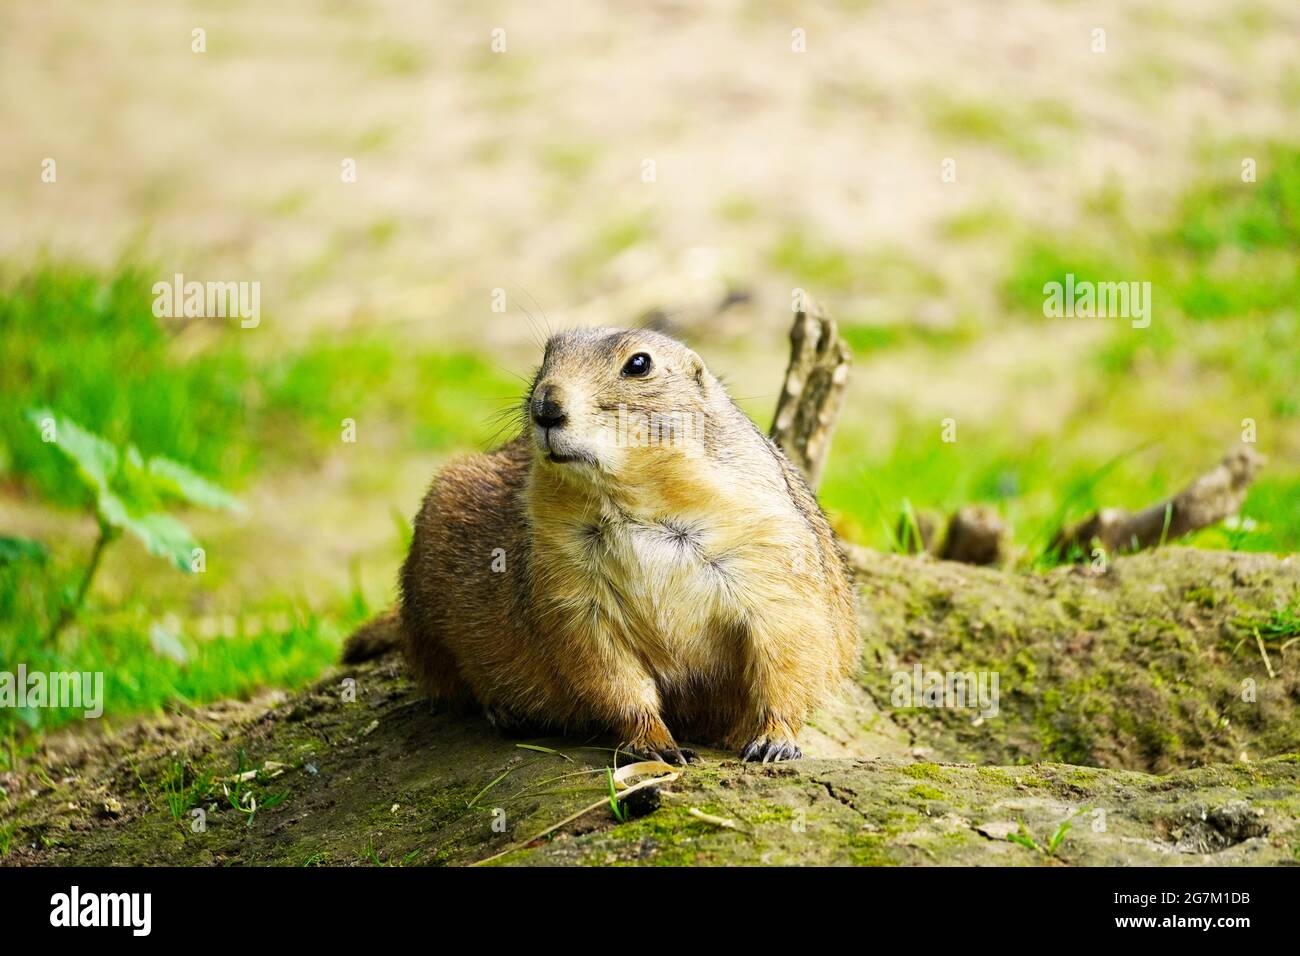 Watchful marmot on a small mound in a natural environment. Rodent close up. Marmota. Stock Photo